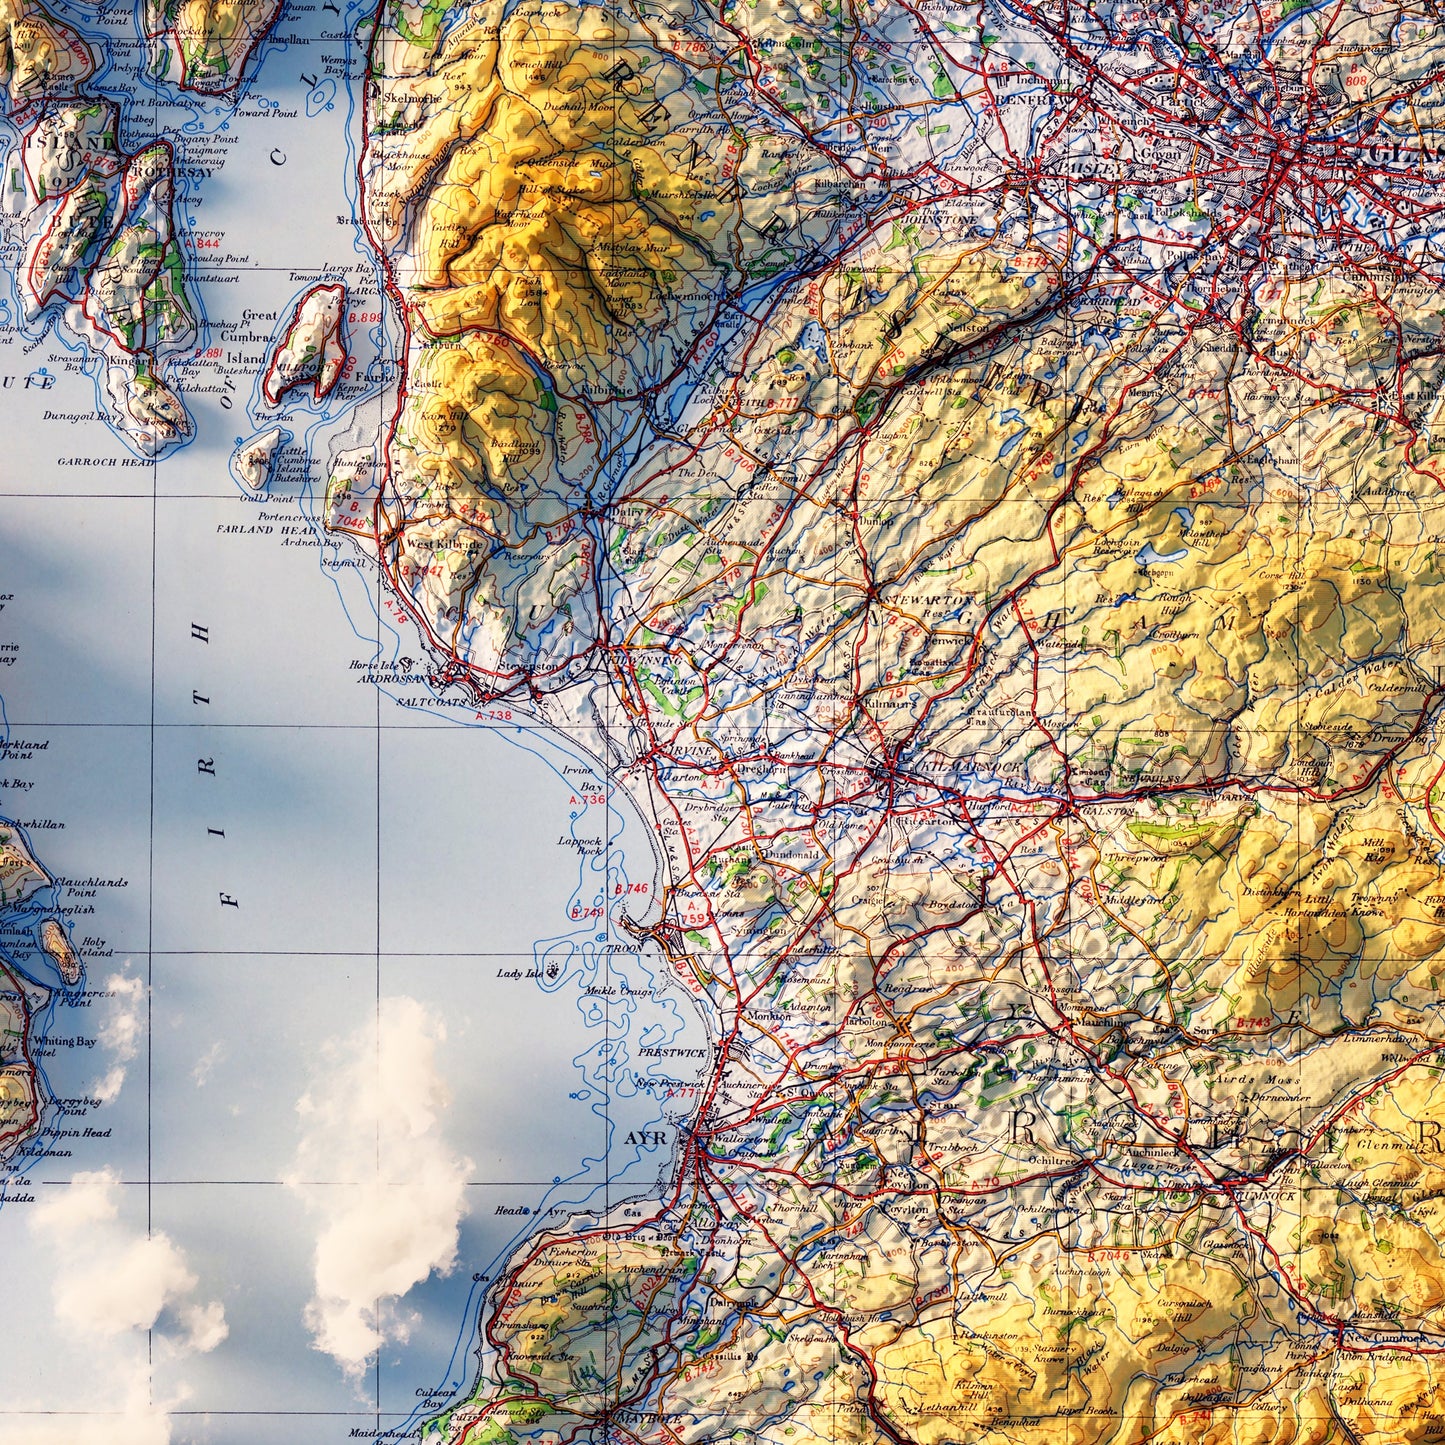 Glasgow and the Middle West 1957 Shaded Relief Map